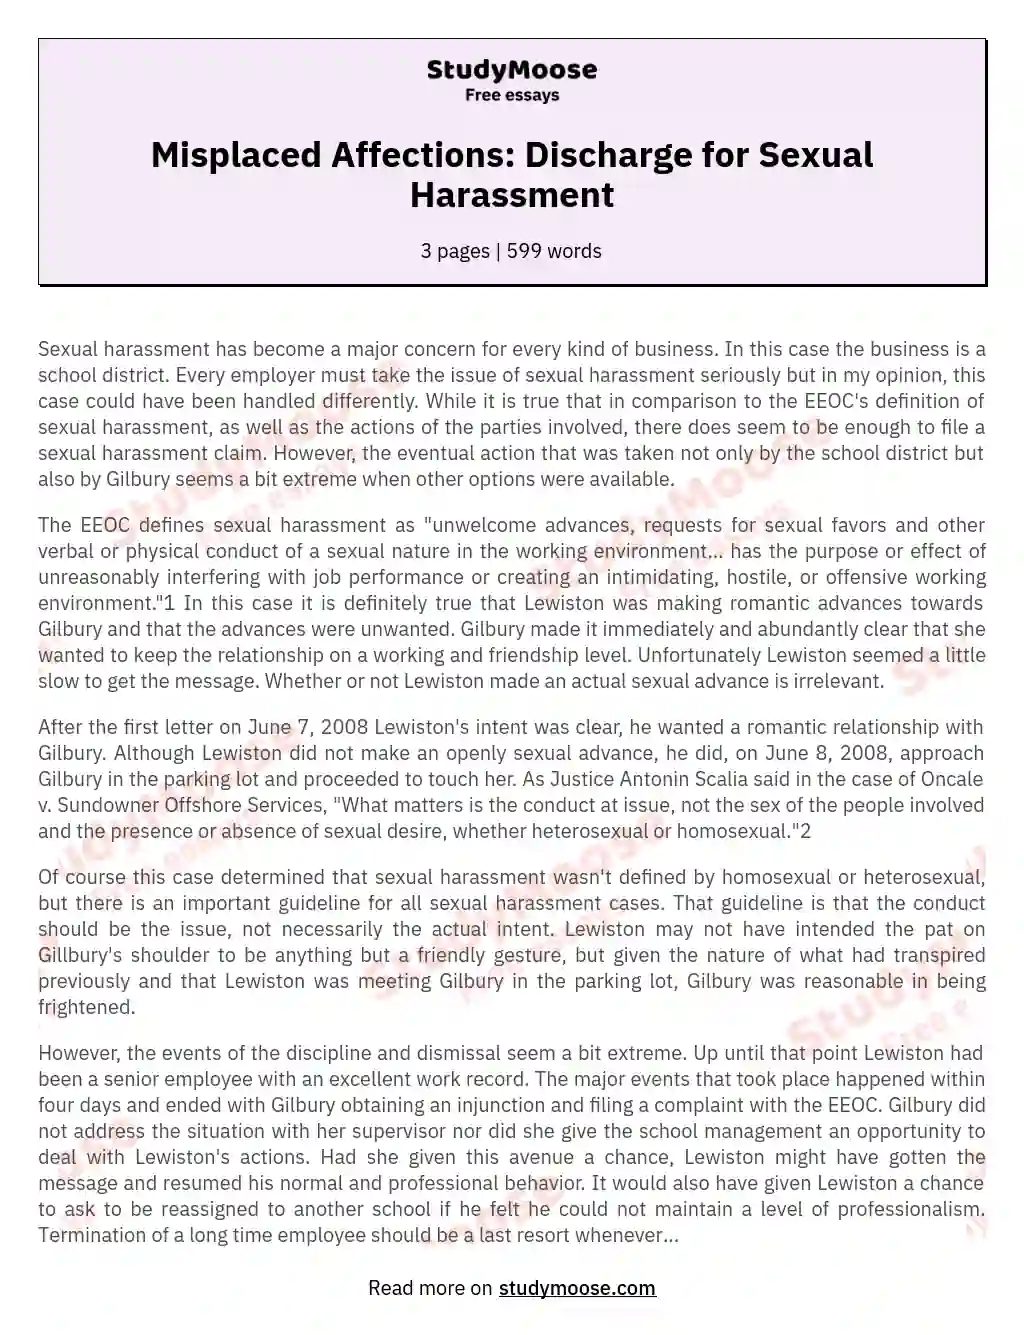 Misplaced Affections: Discharge for Sexual Harassment essay